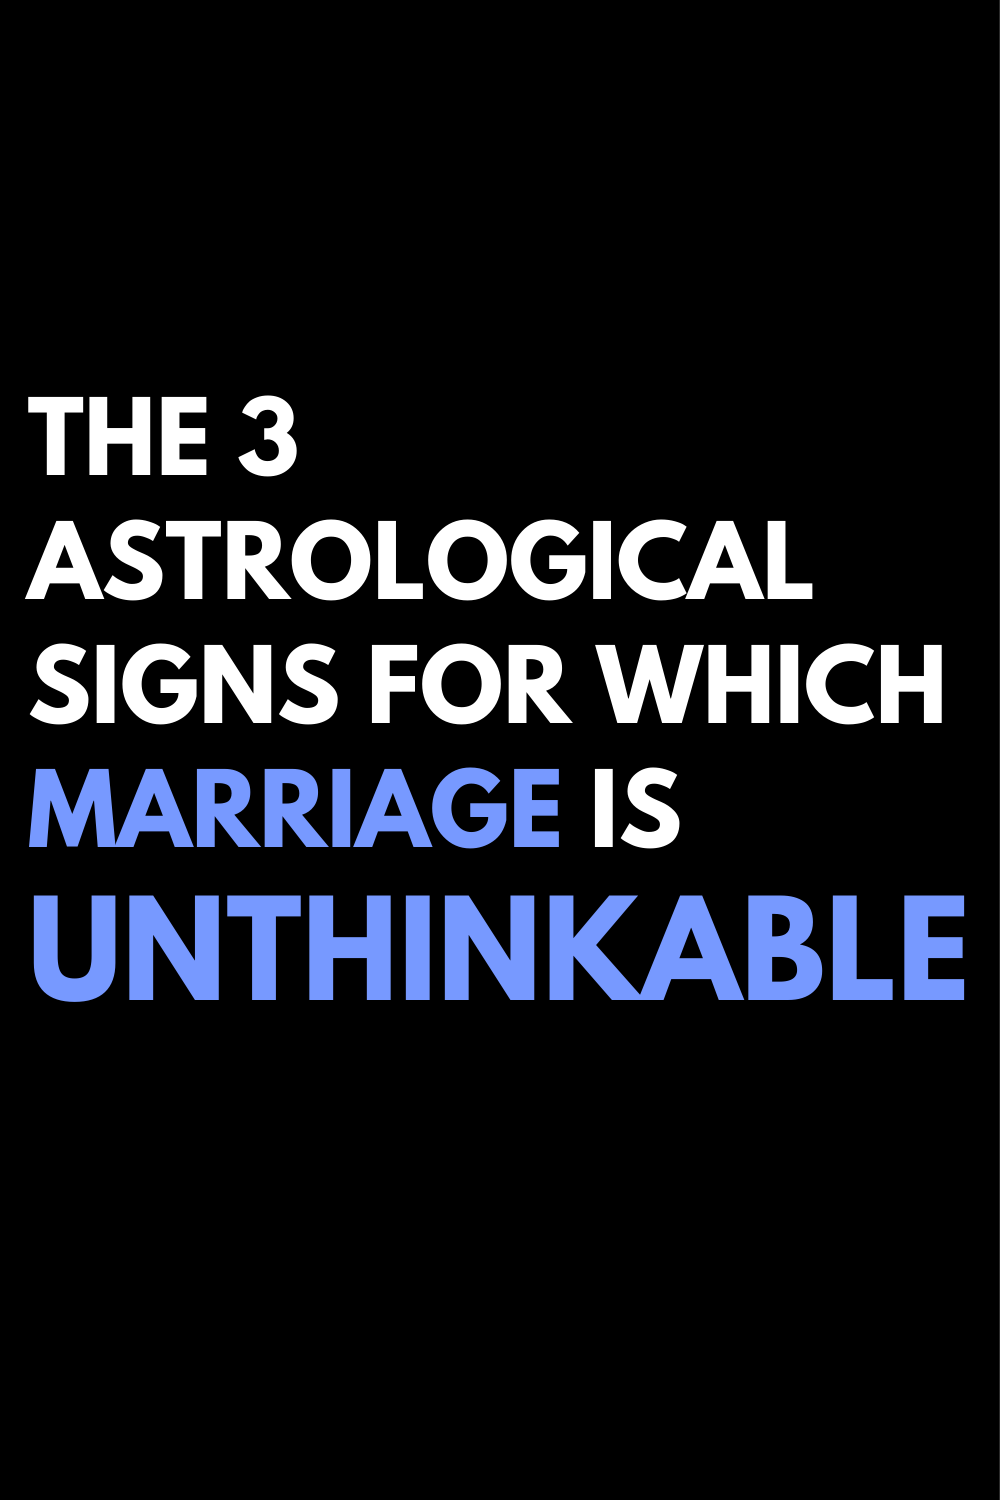 The 3 Astrological Signs For Which Marriage Is Unthinkable